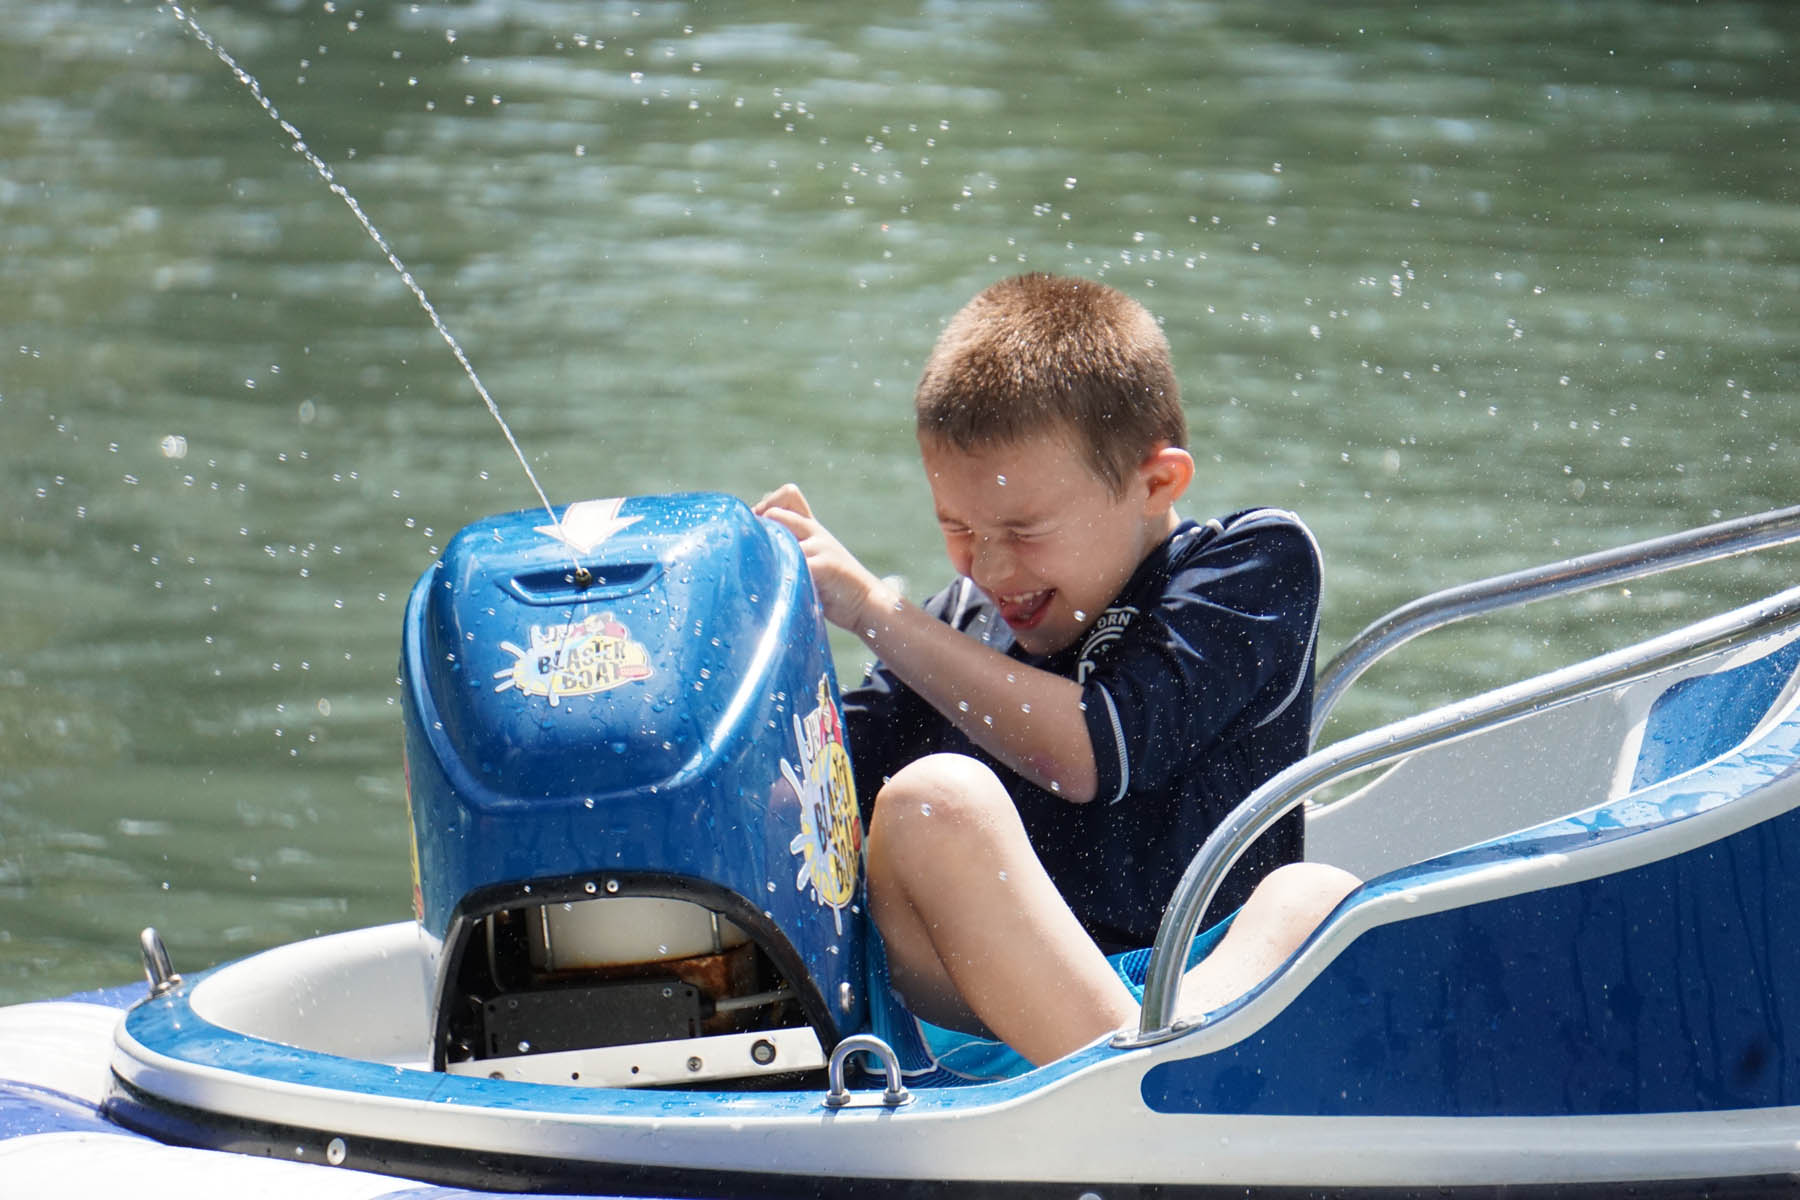 Young boy firing water from bumper boat blaster.